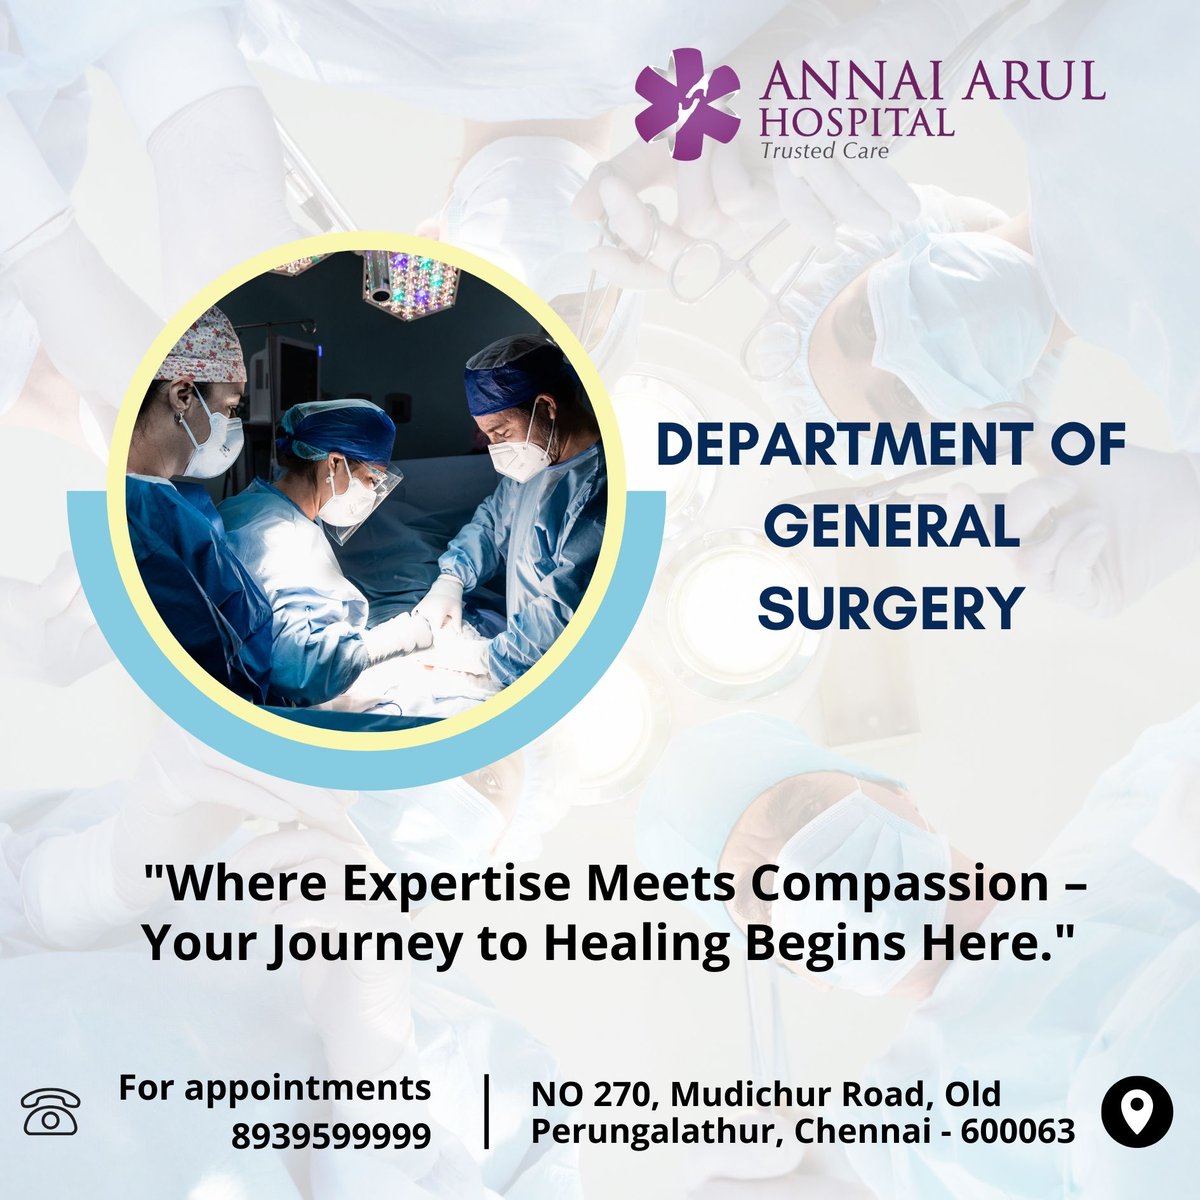 'Annai Arul Hospital: Precision in Every Incision, Excellence in Every Procedure.'
 'Where Expertise Meets Compassion – Your Journey to Healing Begins Here.'

 #AnnaiArulHospital
 #SurgicalExcellence
 #HealingWithCompassion
 #GeneralSurgery

annaiarulhospital.com/general-surger…